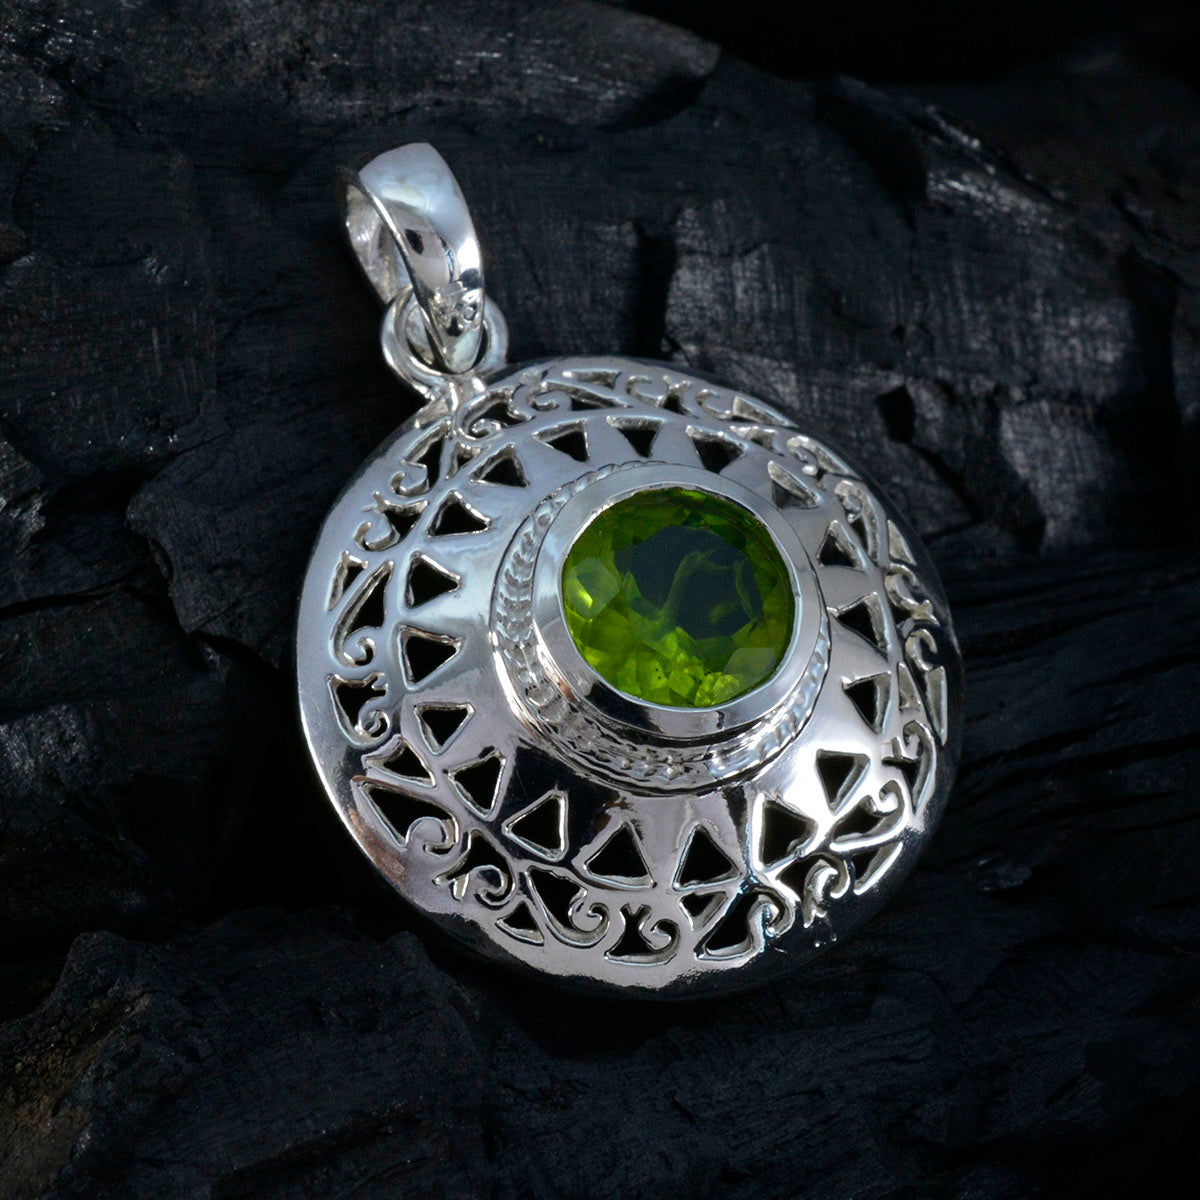 Riyo Nice Gems Round Faceted Green Peridot Solid Silver Pendant Gift For Good Friday